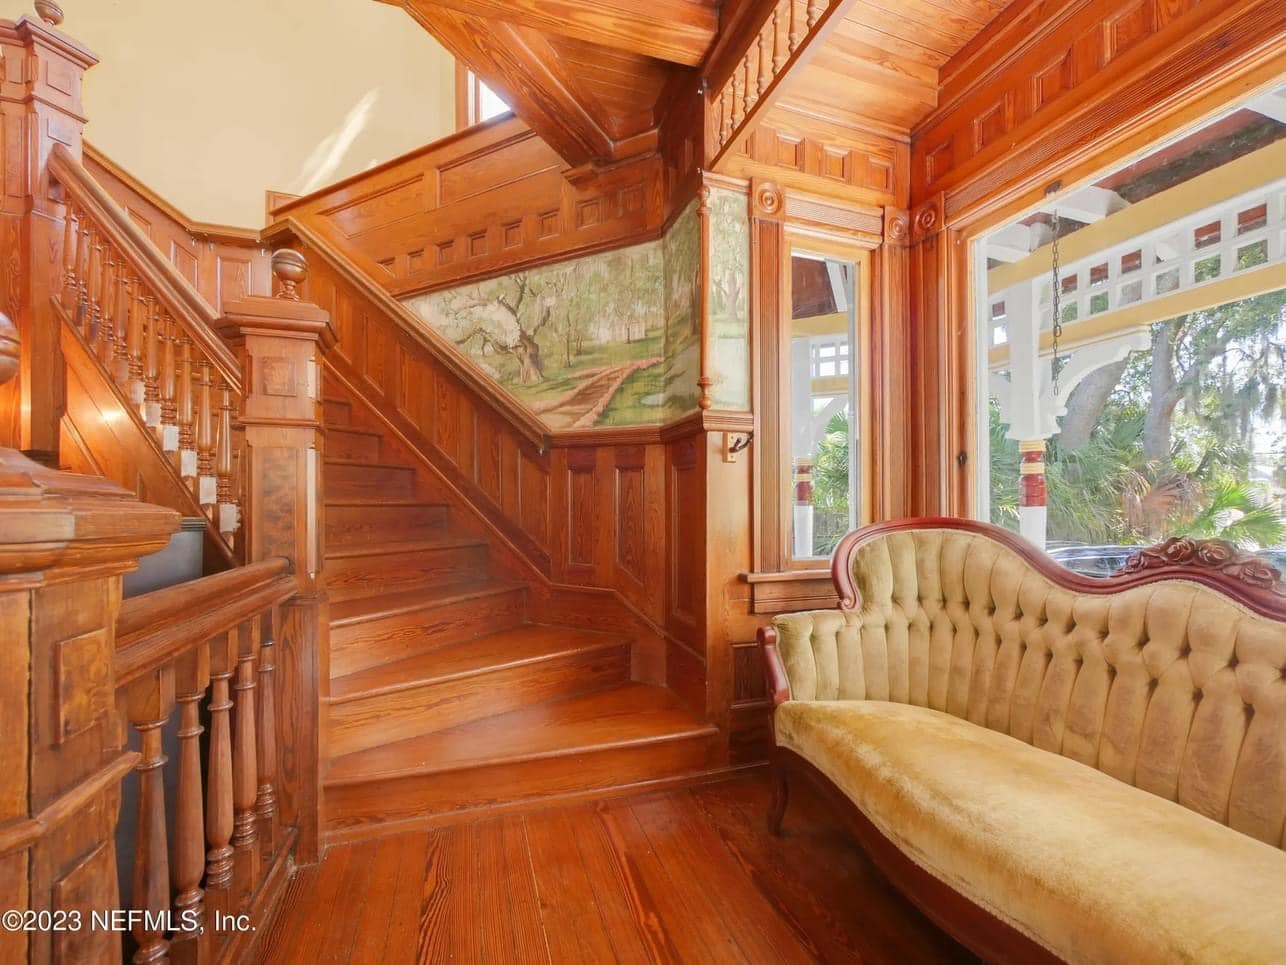 1890 Victorian For Sale In Saint Augustine Florida